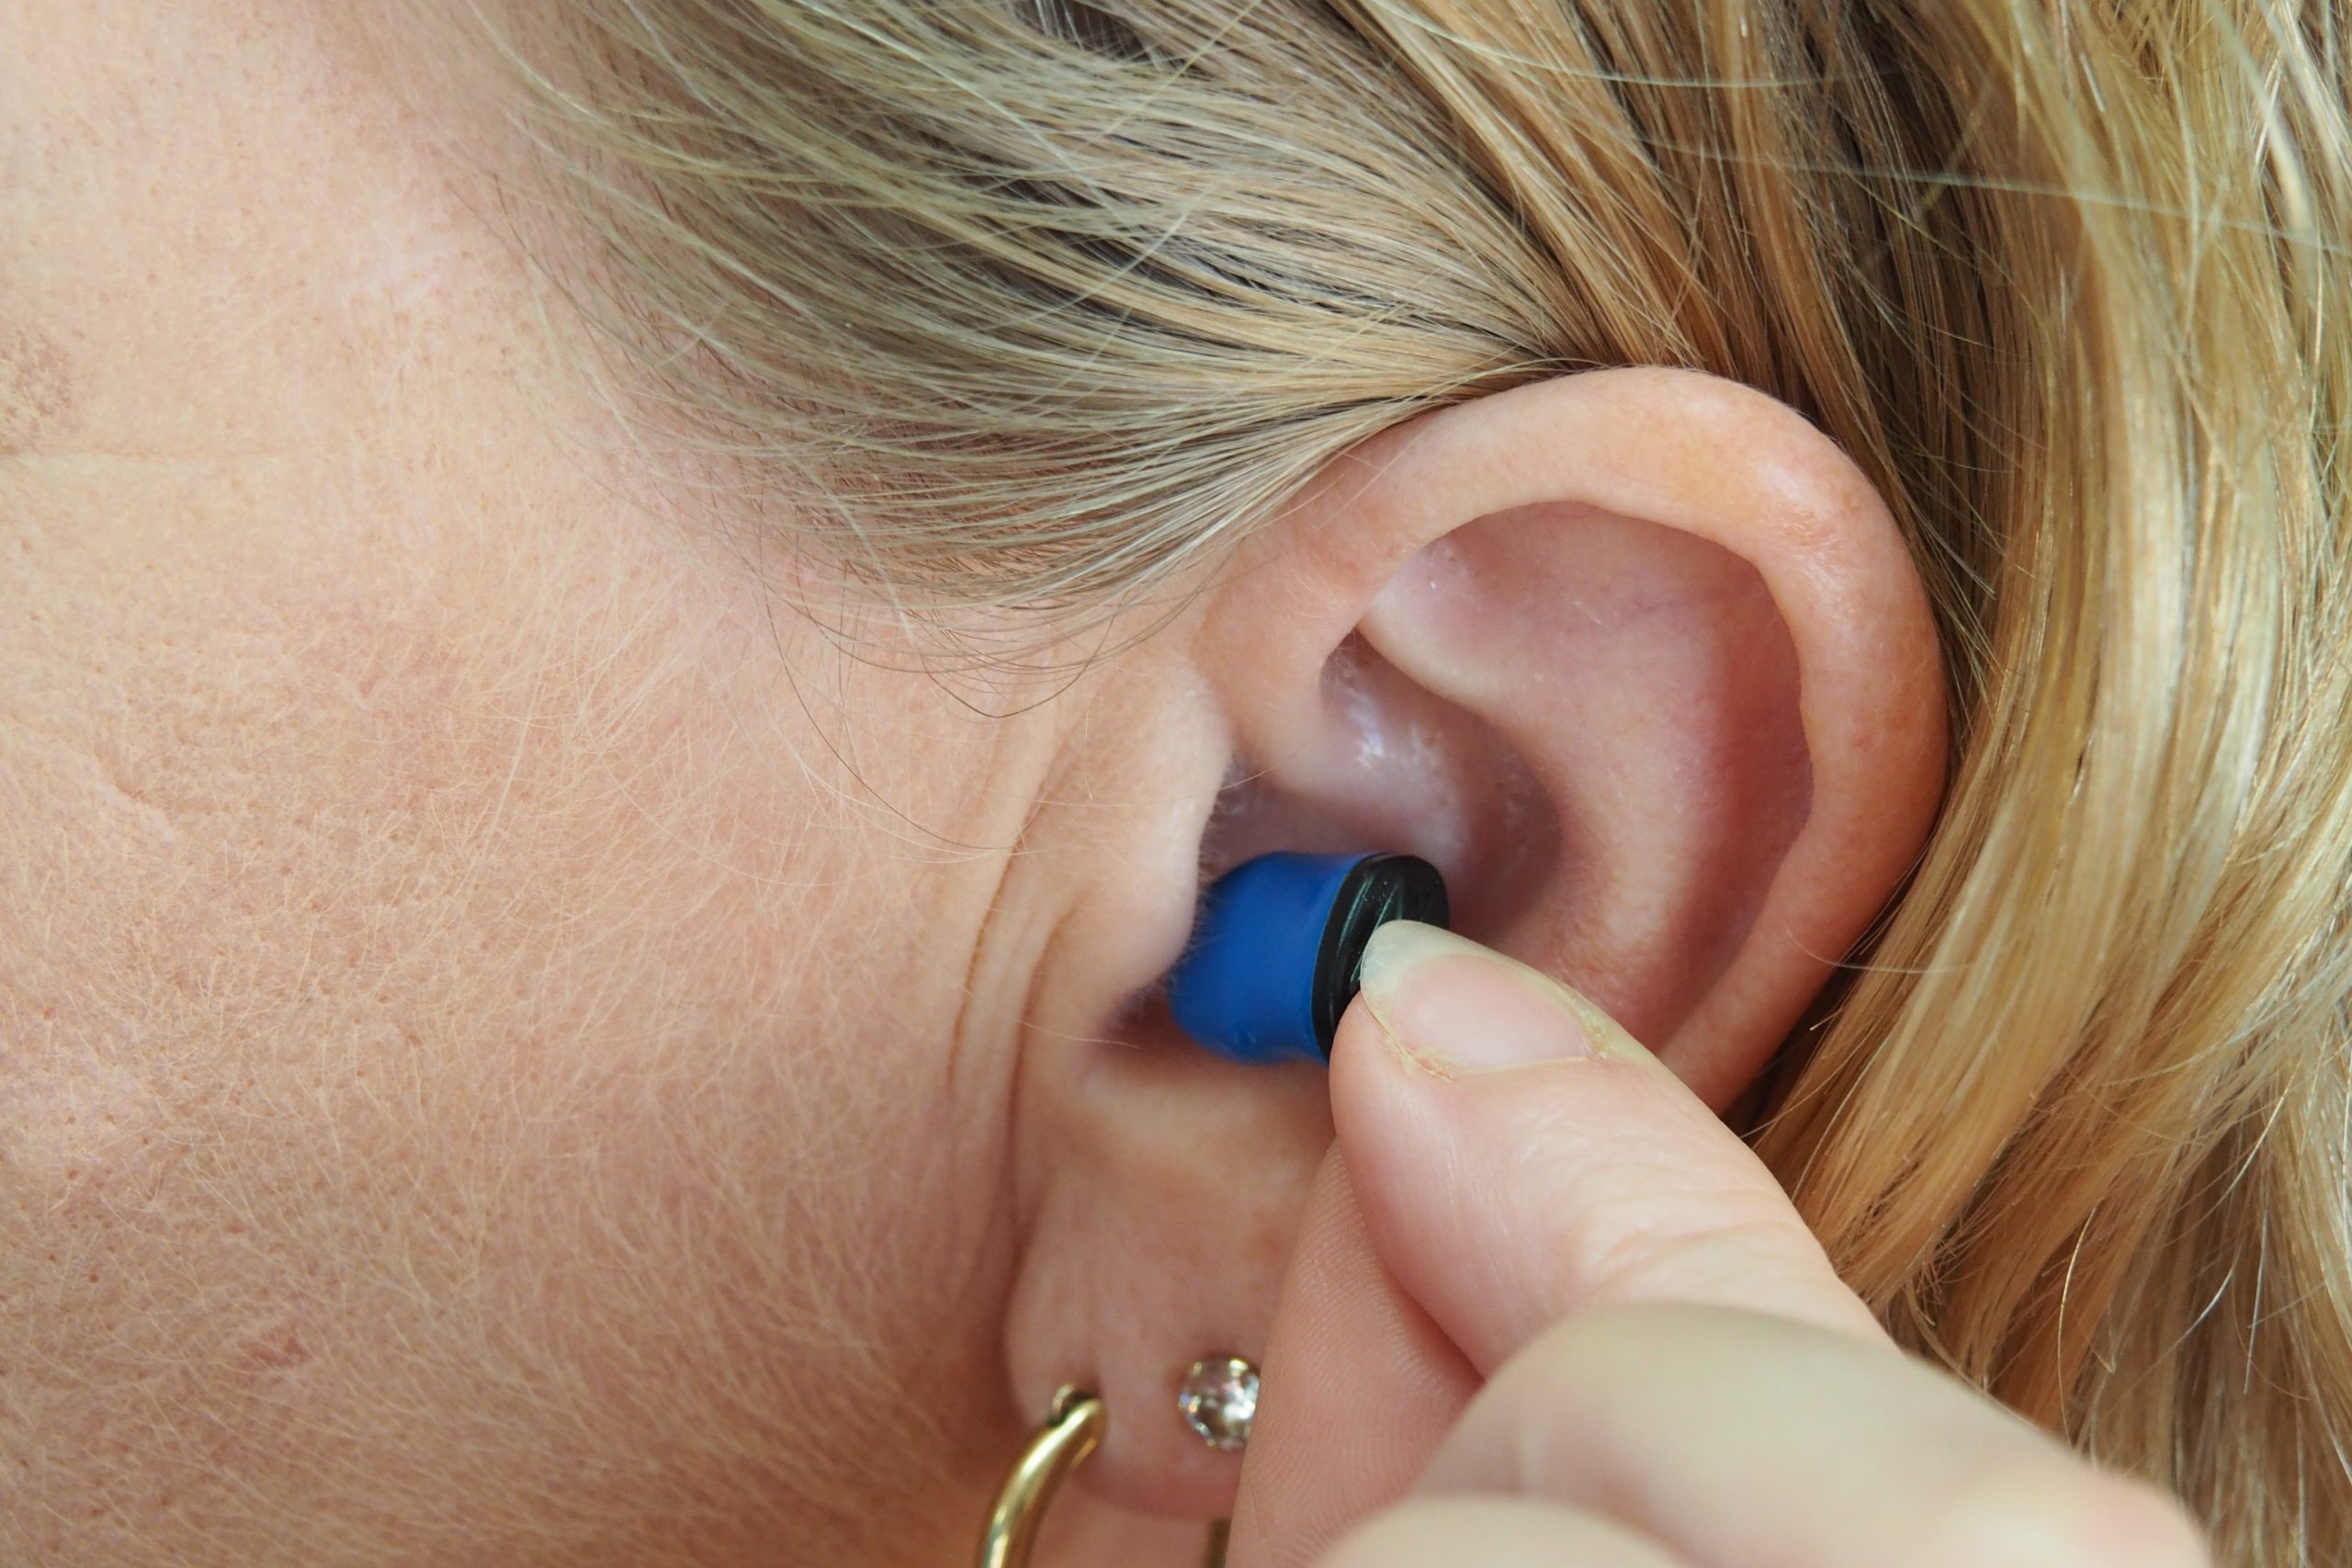 Are Hearing Aids Covered Under Medical Insurance?